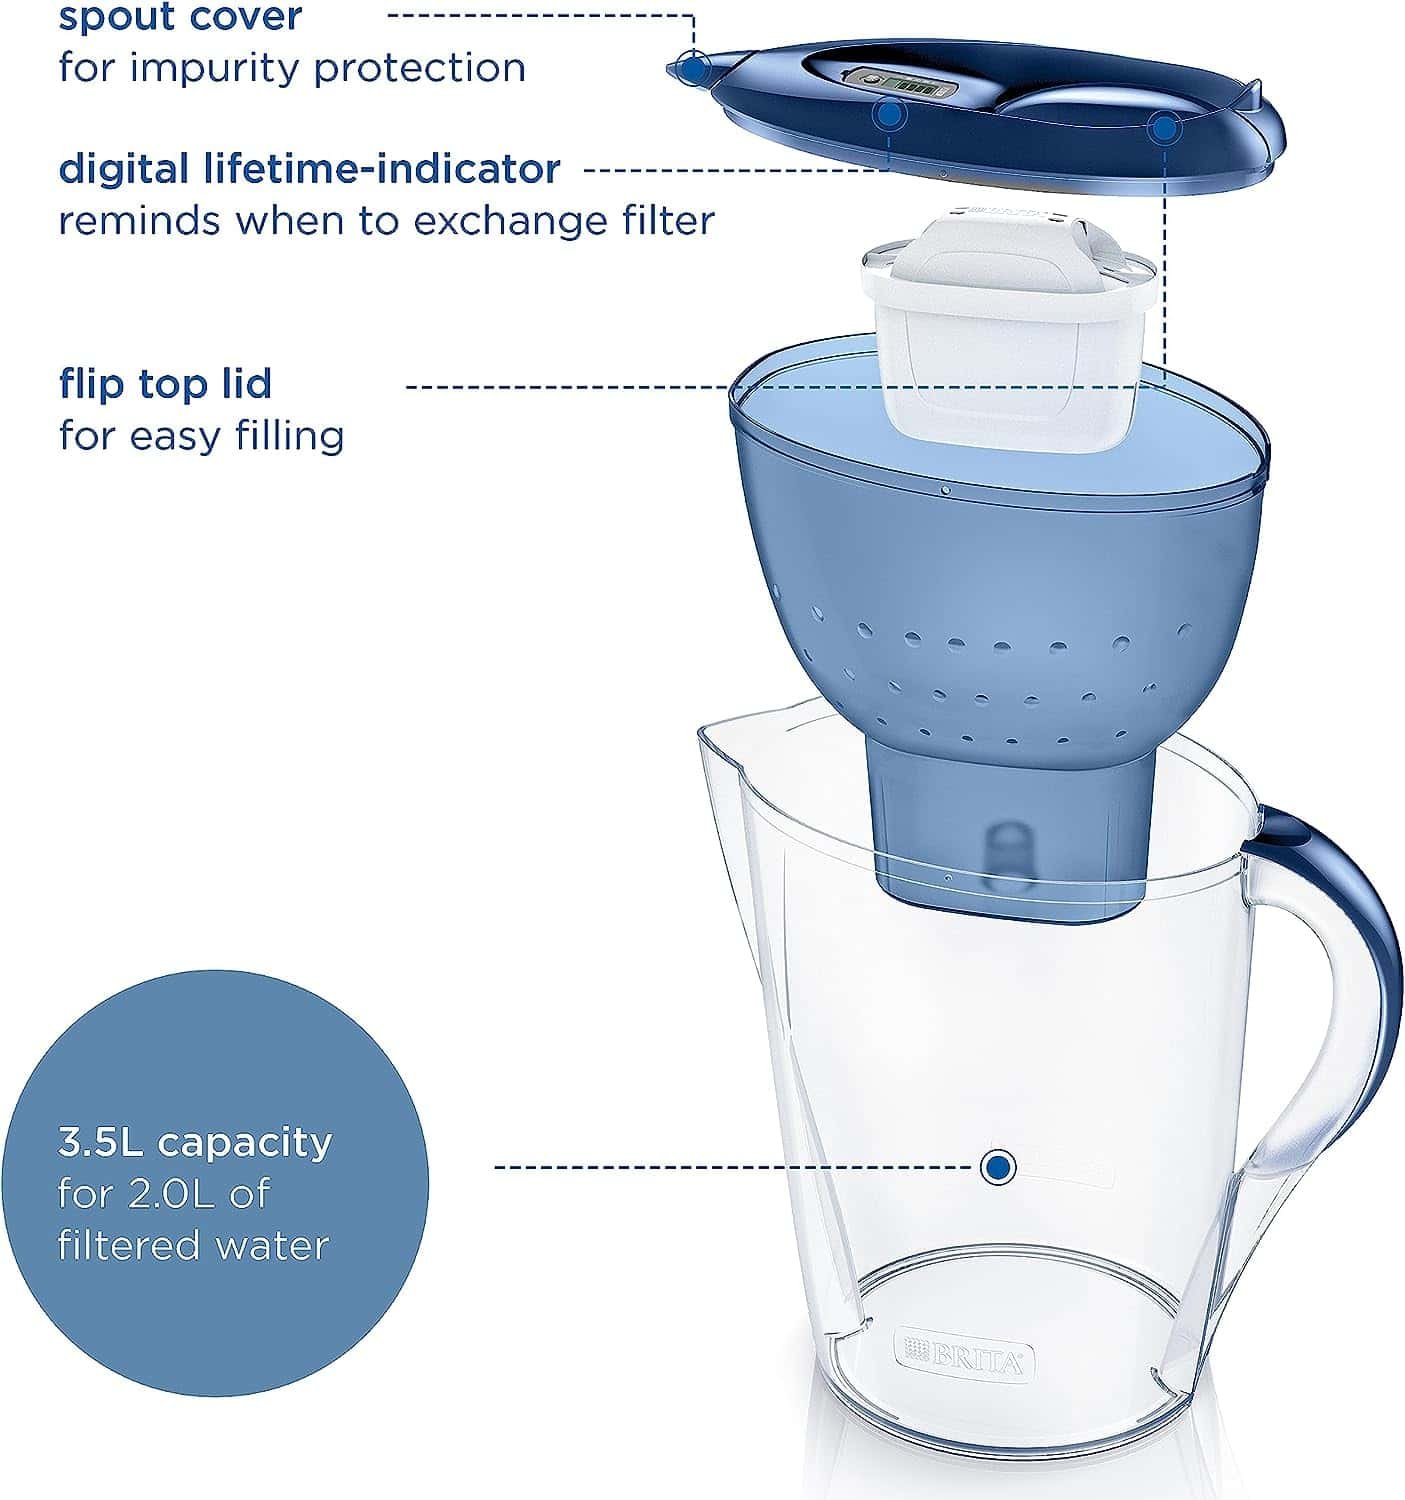 BRITA Marella 3.5L water filter jug with pack 6 filter - white, white Fixed  Size